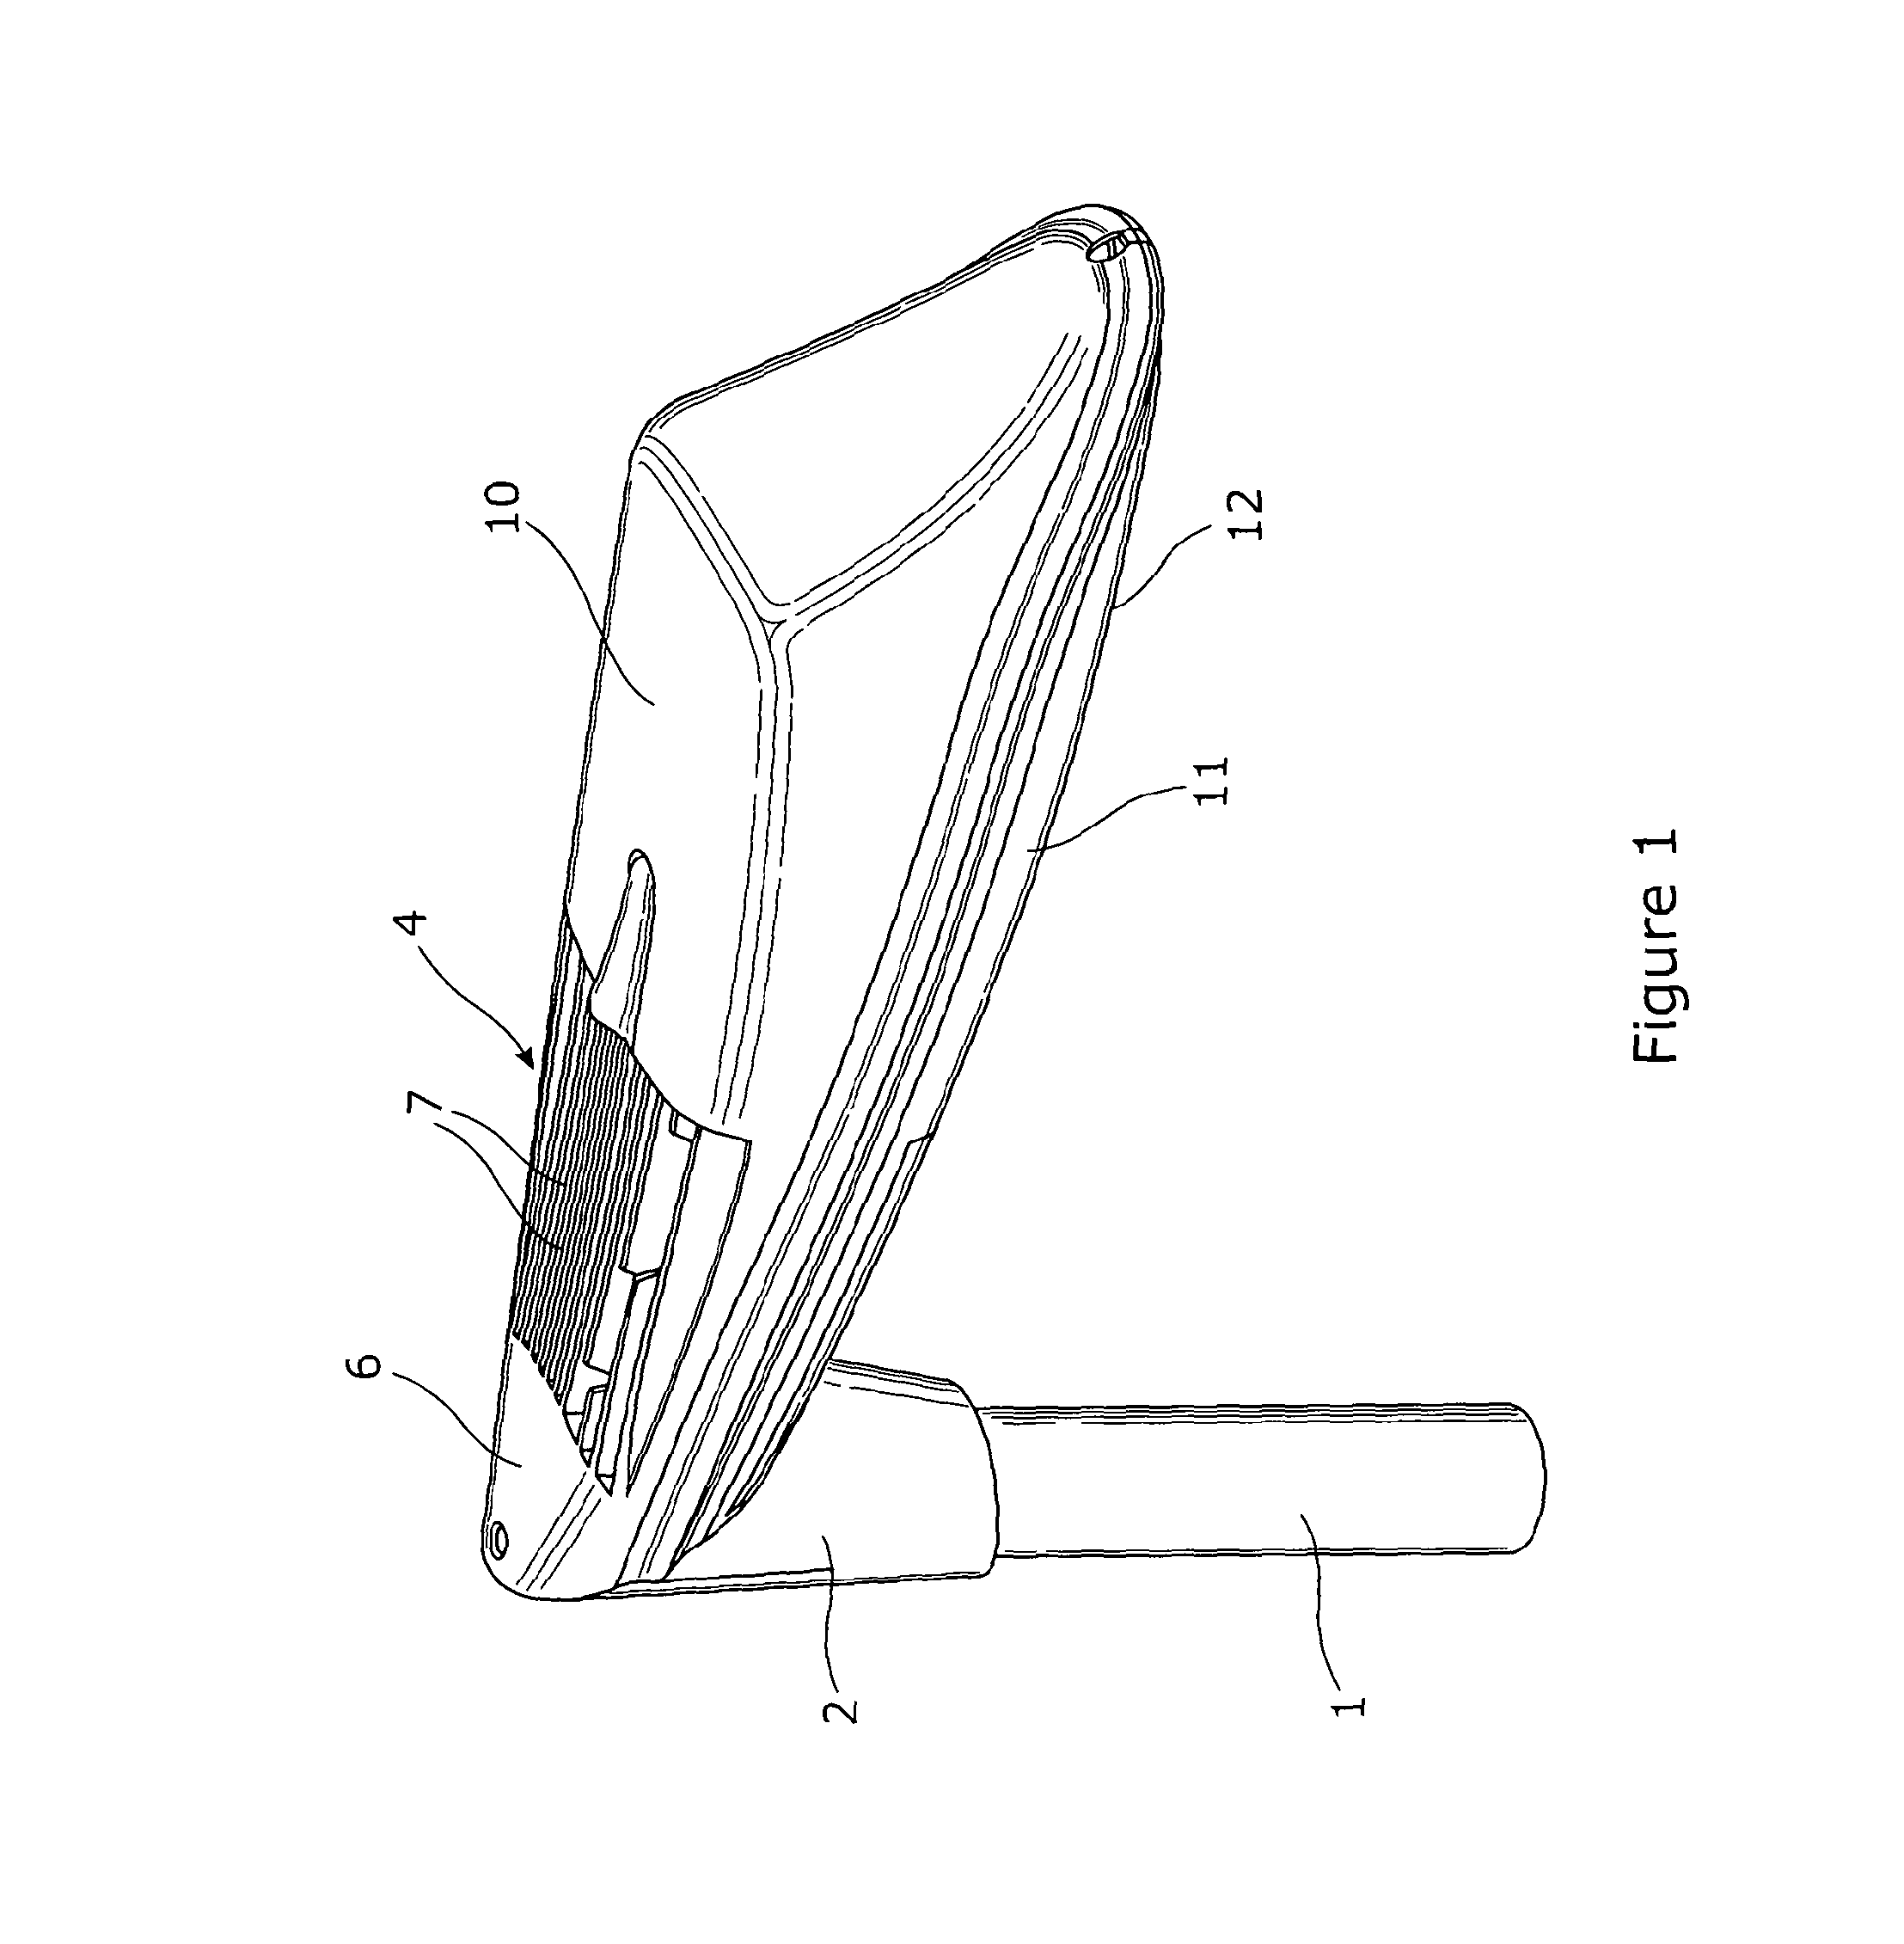 Microwave driven electrodeless lamp comprising magnetron without forced convective cooling